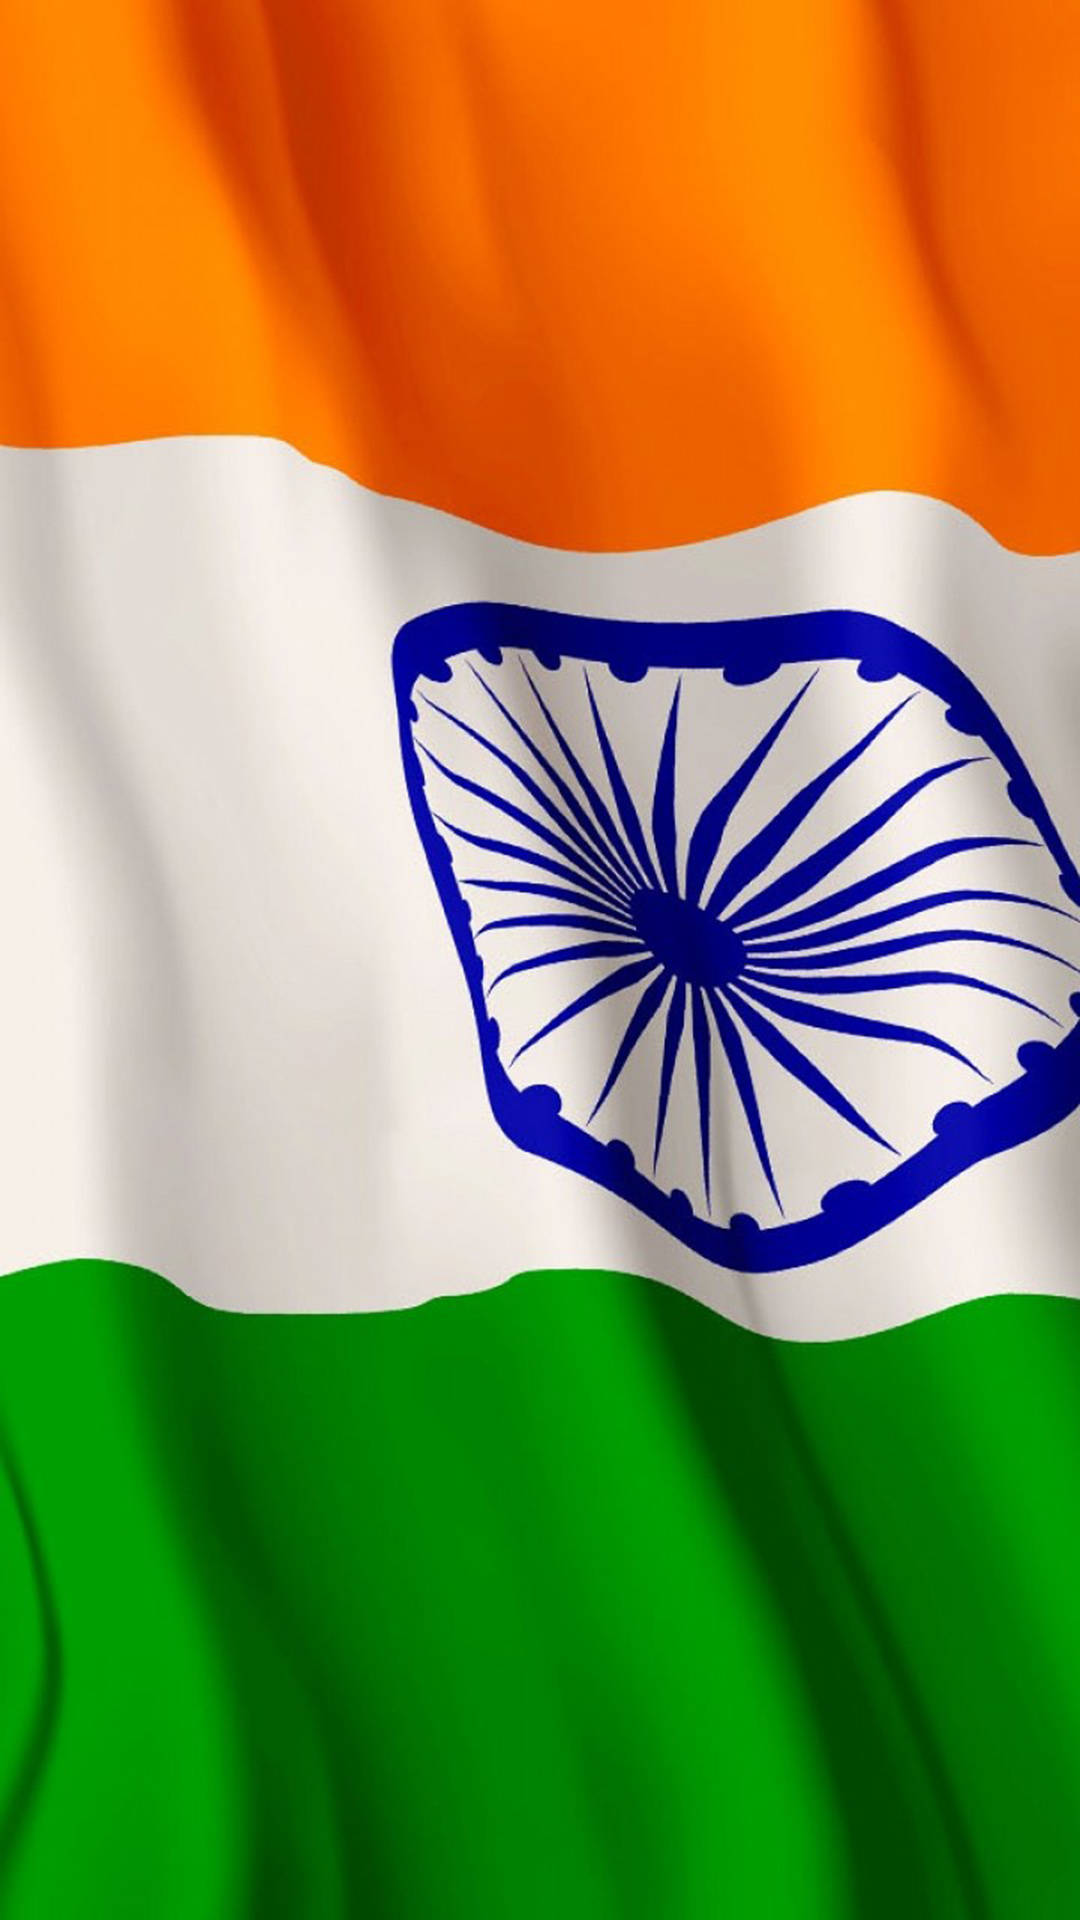 Proud Colors - The Wavy Indian Flag Background